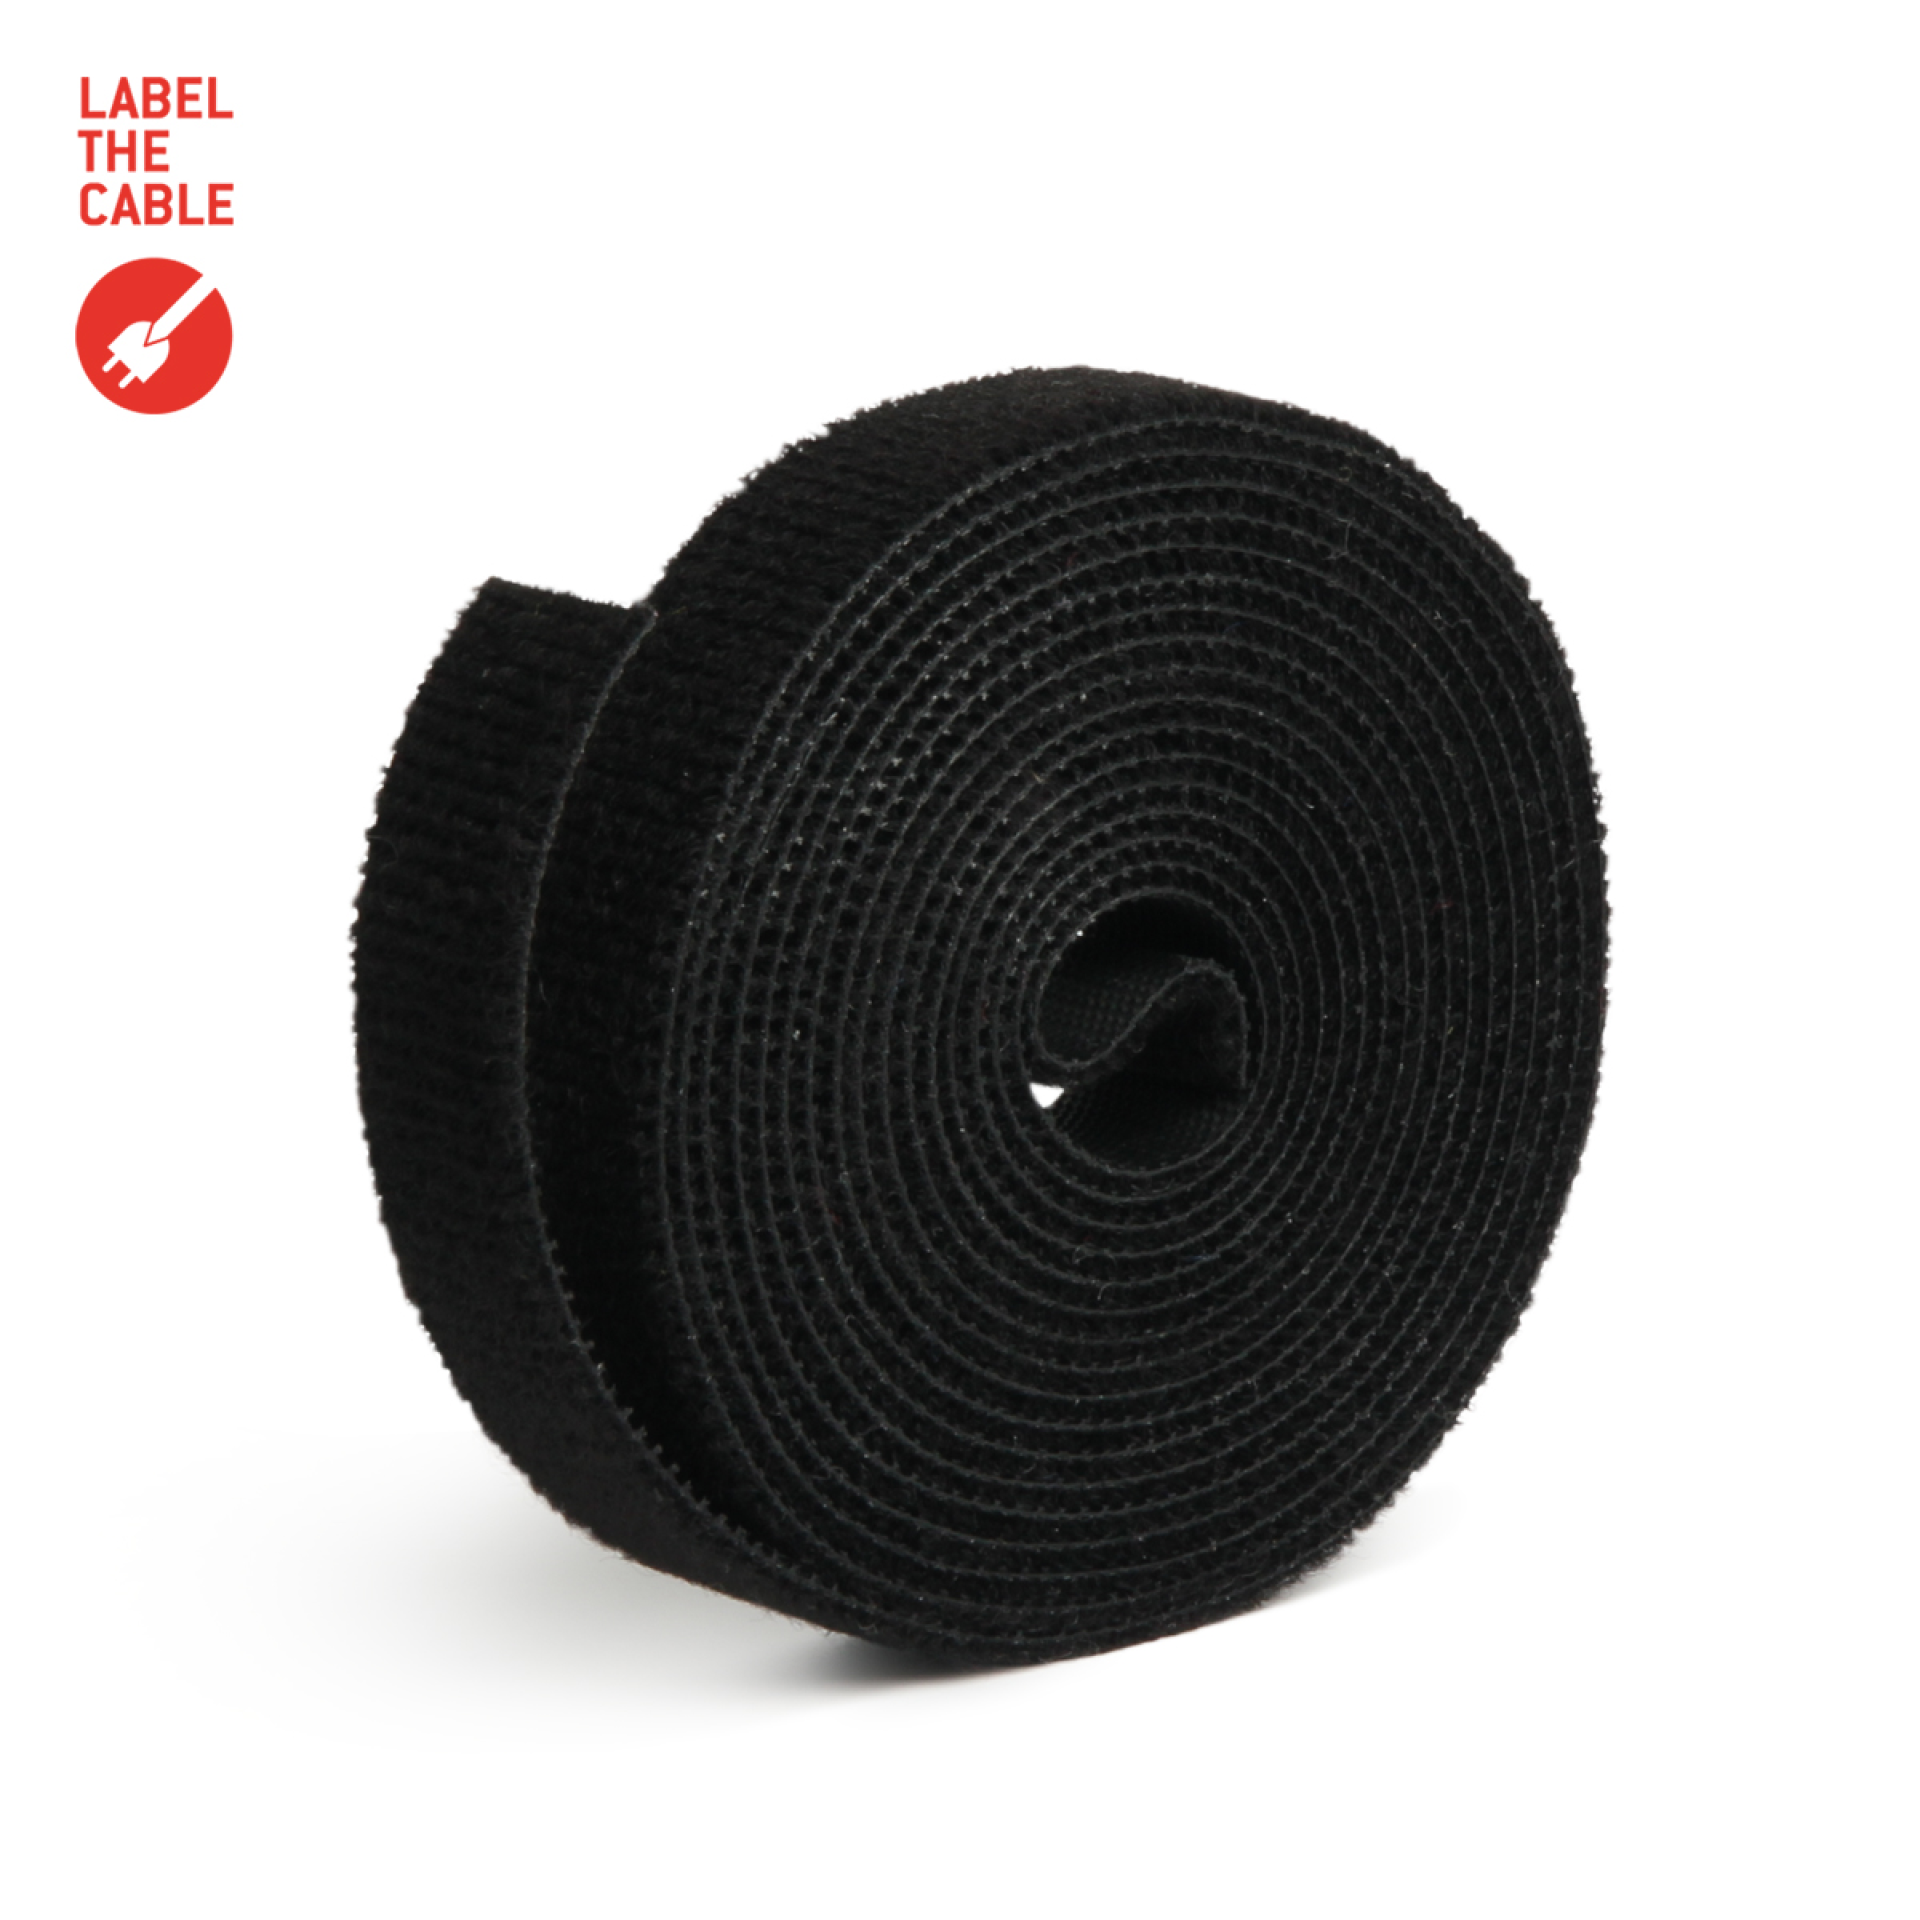 LTC ROLL STRAP, double sided hook and loop roll 3m black